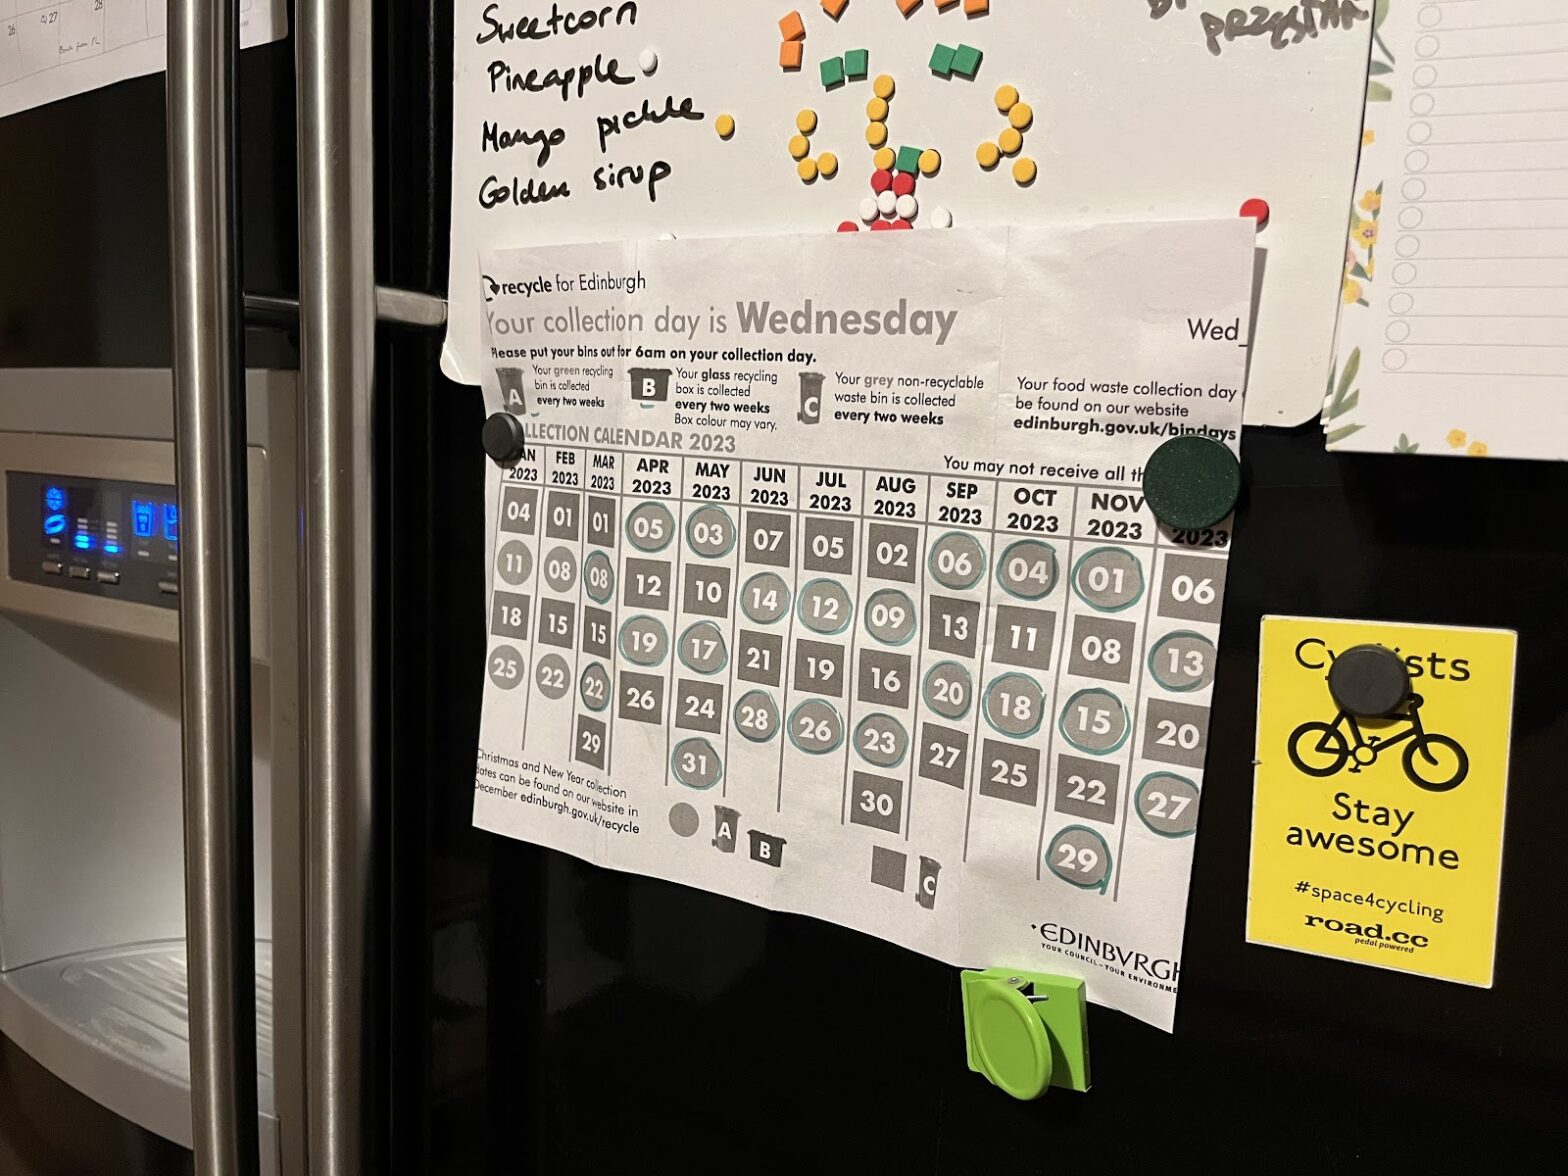 photo of a recycling calendar attached to a fridge door